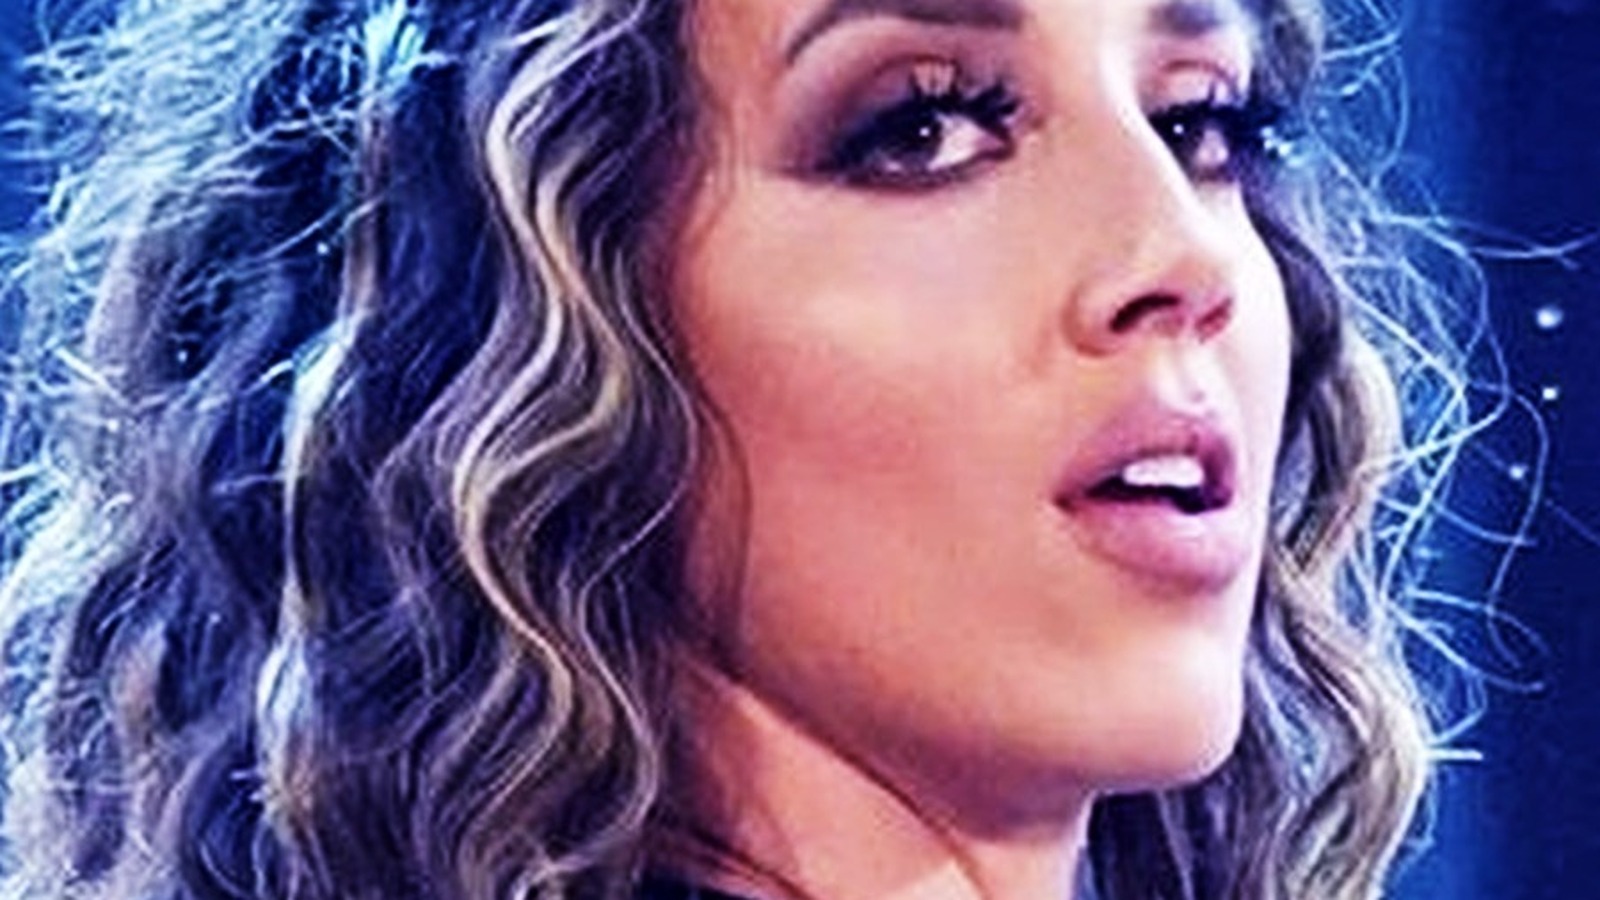 Chelsea Green Officially Quits IMPACT Wrestling Amid WWE Return Rumors